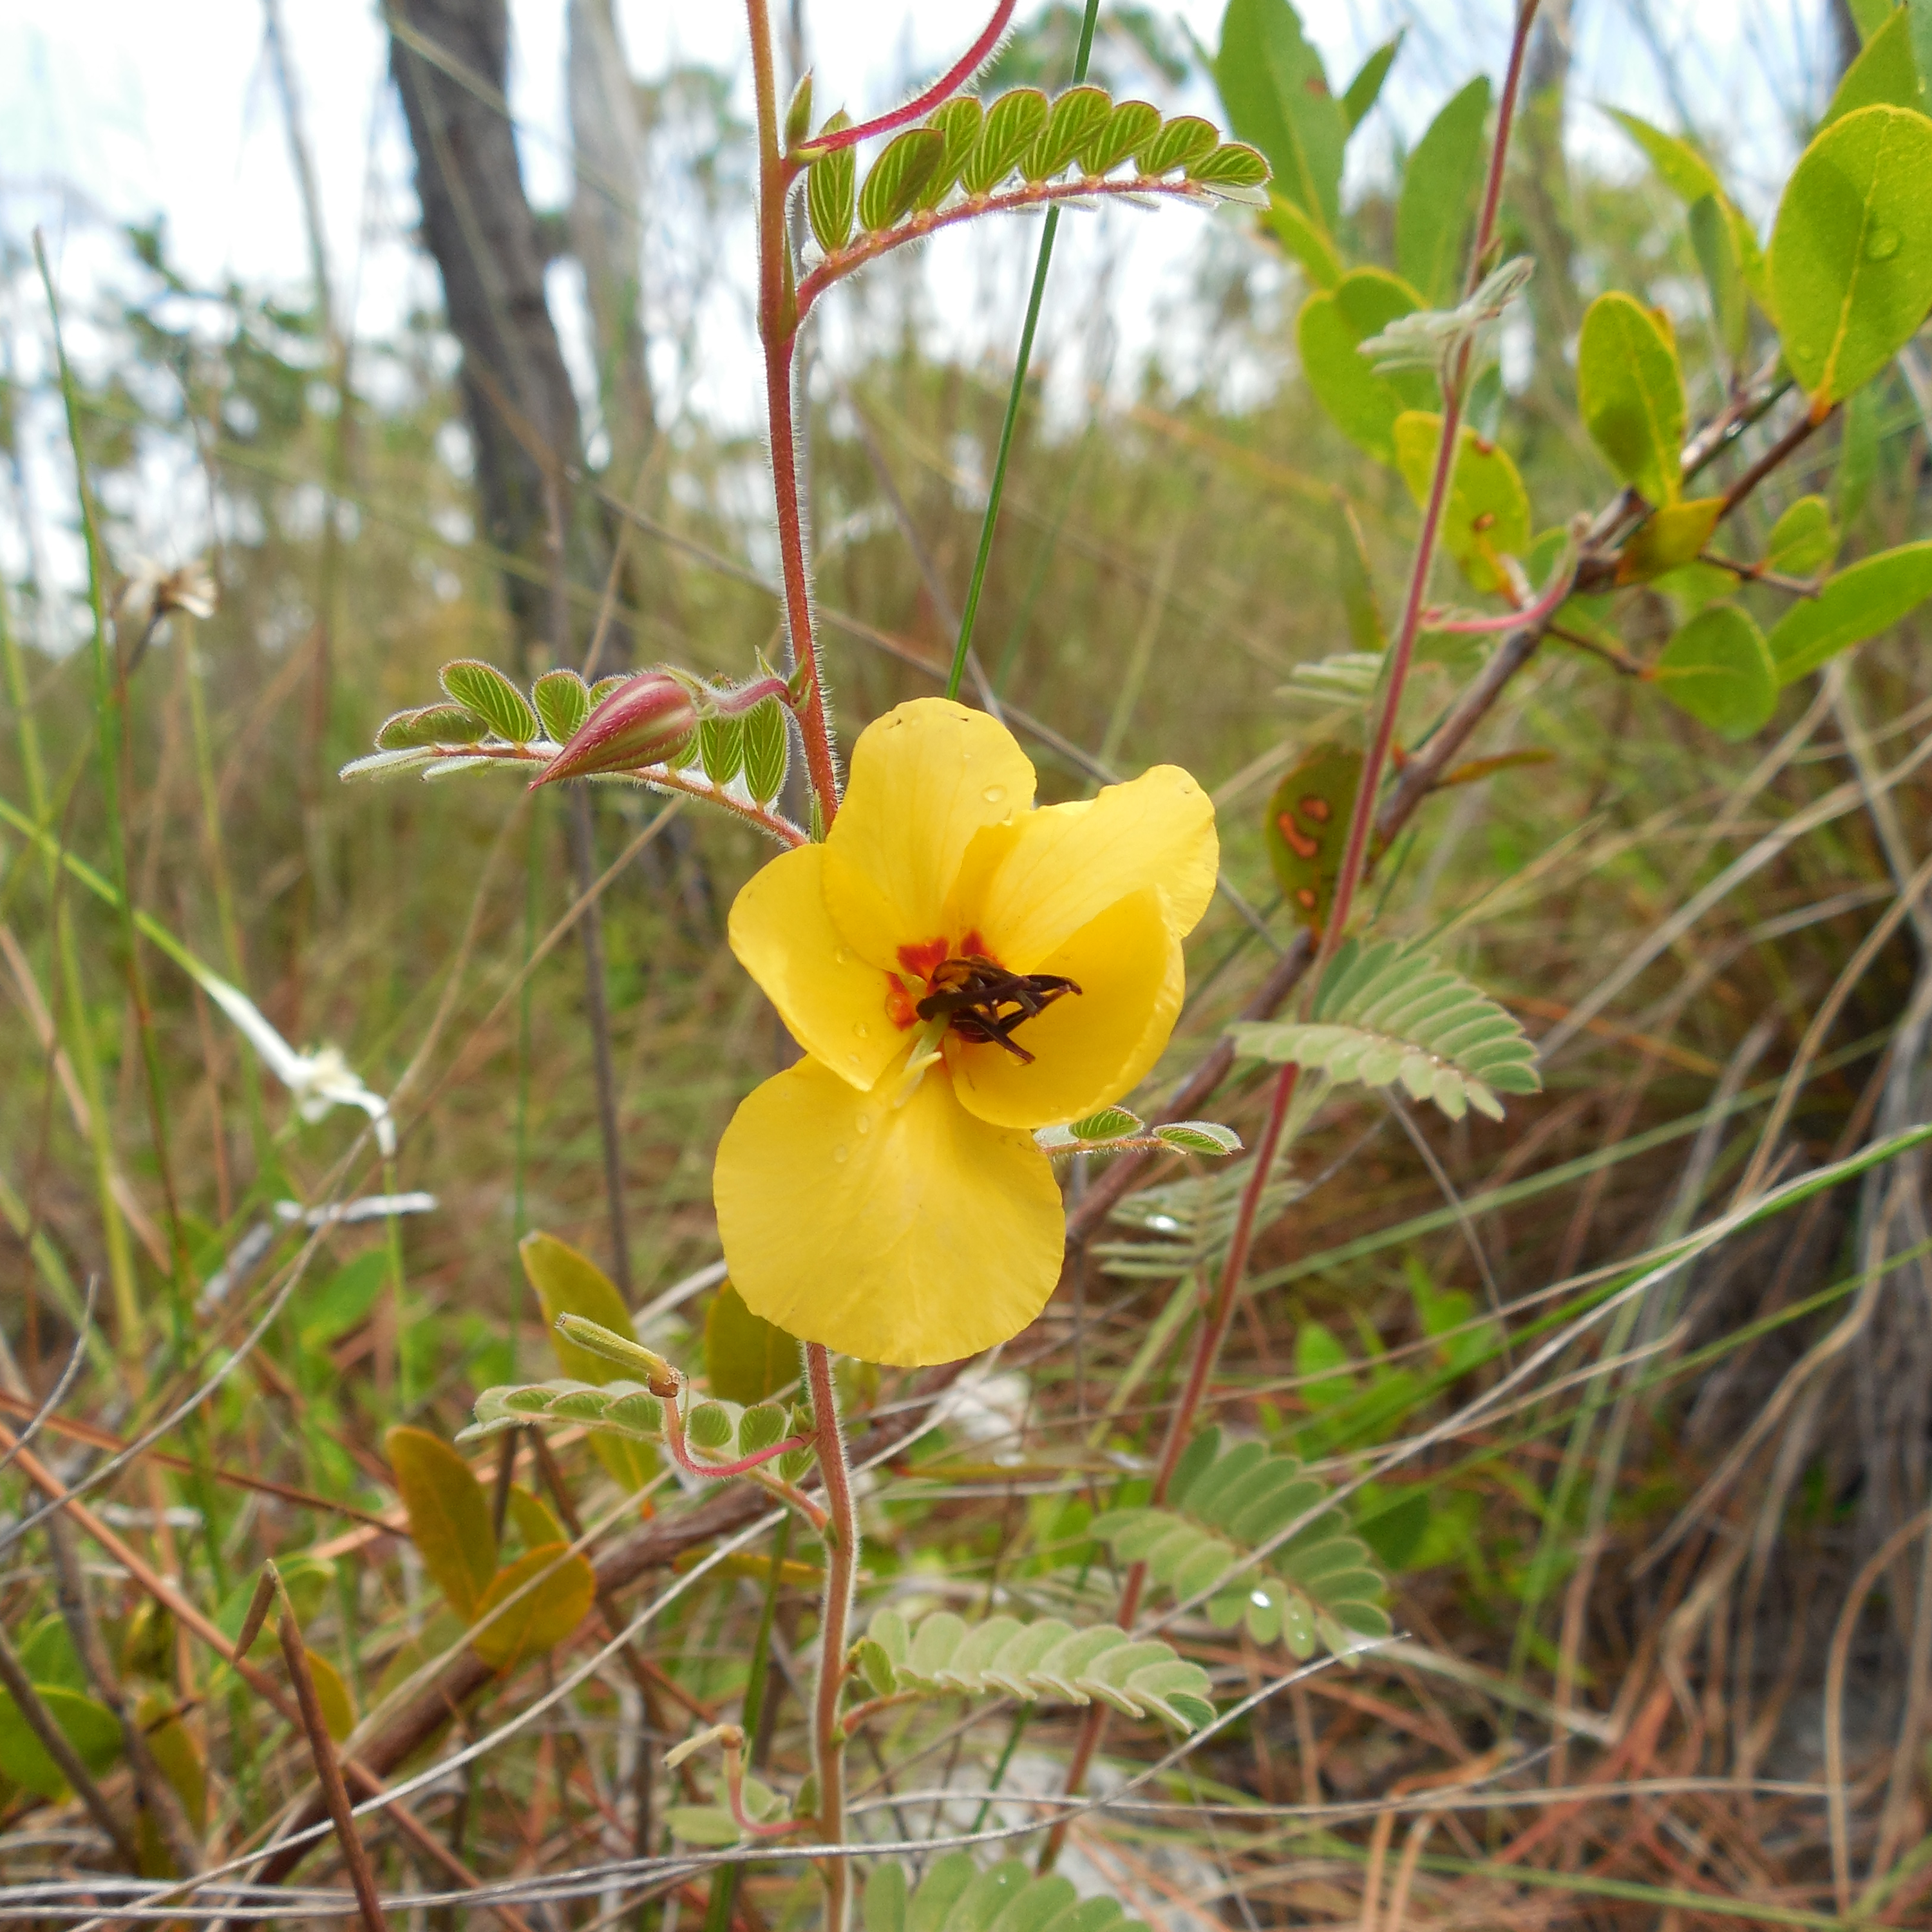 Yellow flower with five petals